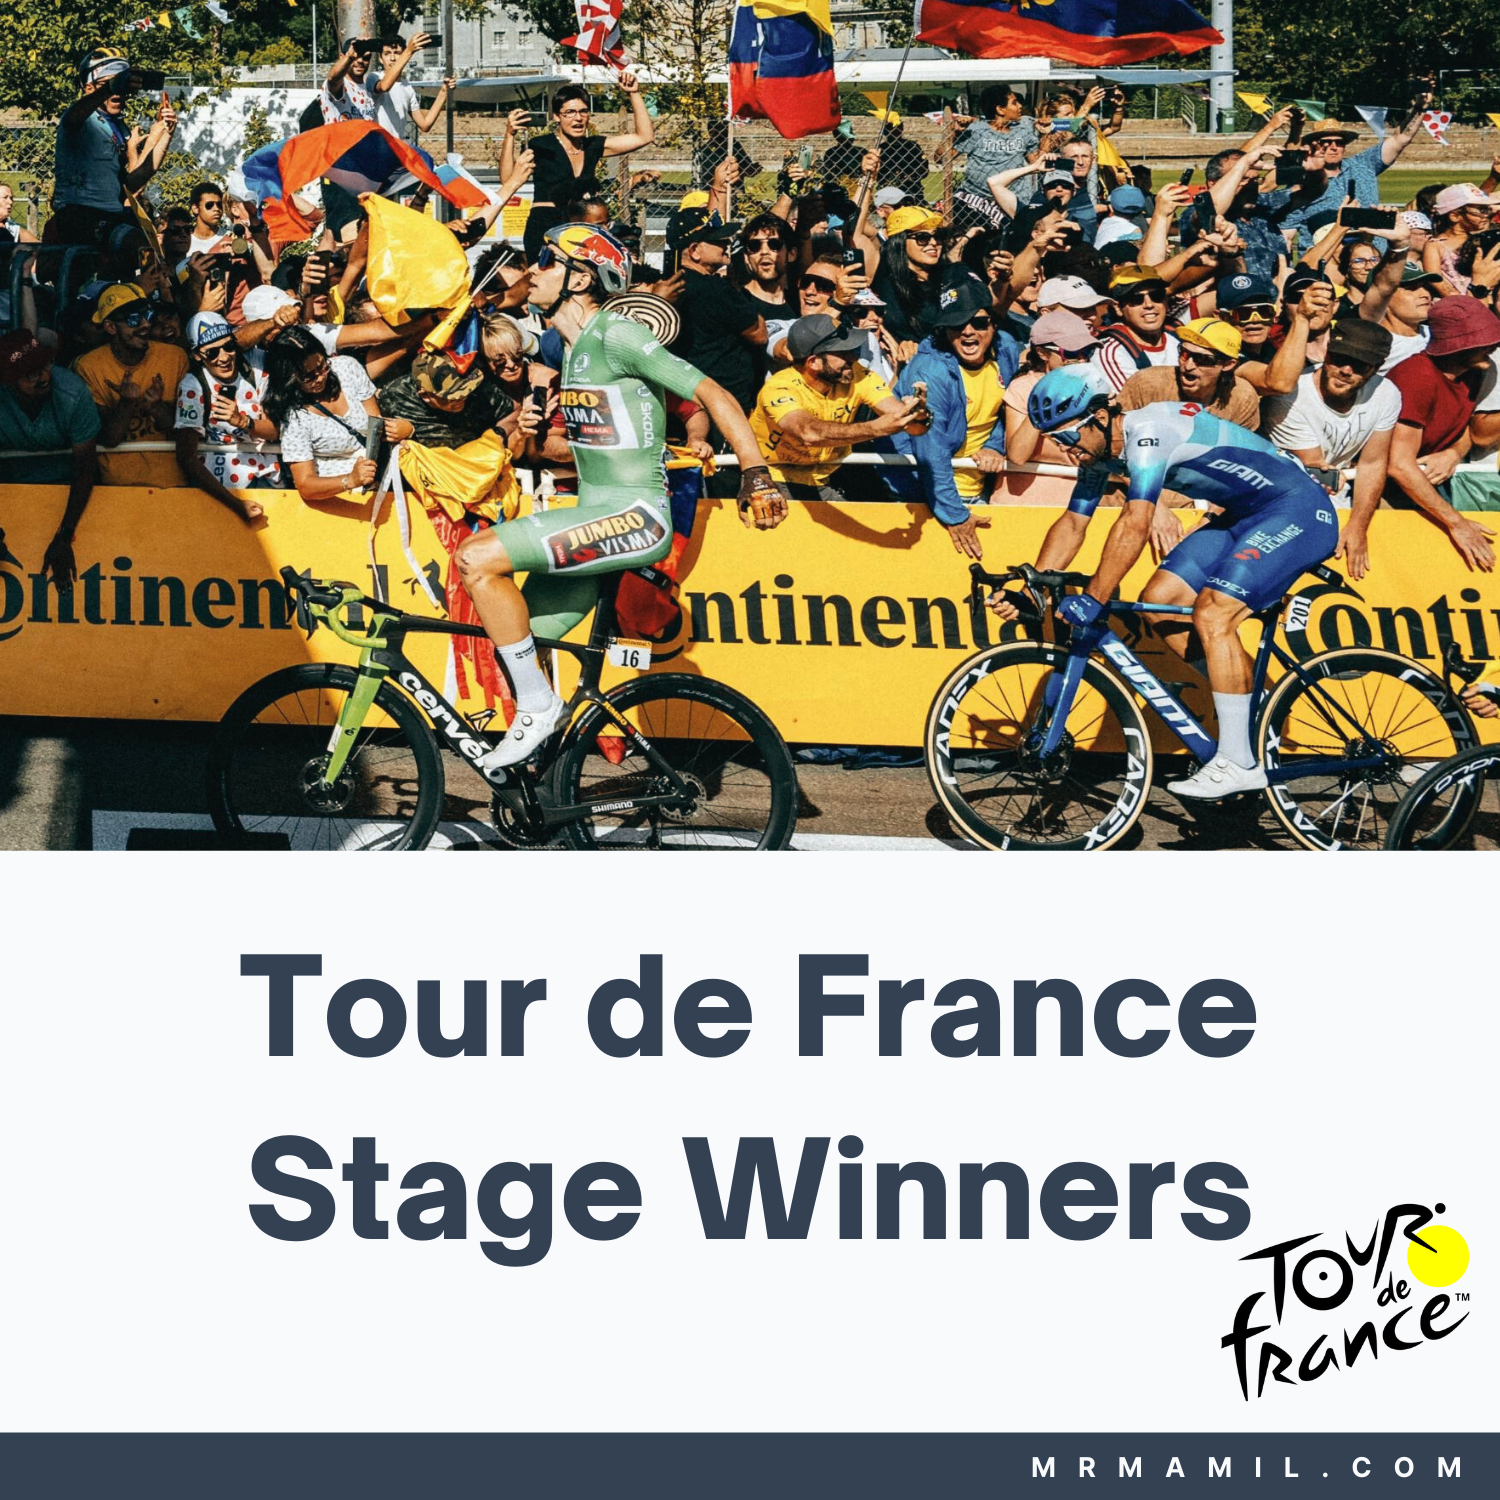 Riders with Most Tour de France Stage Wins